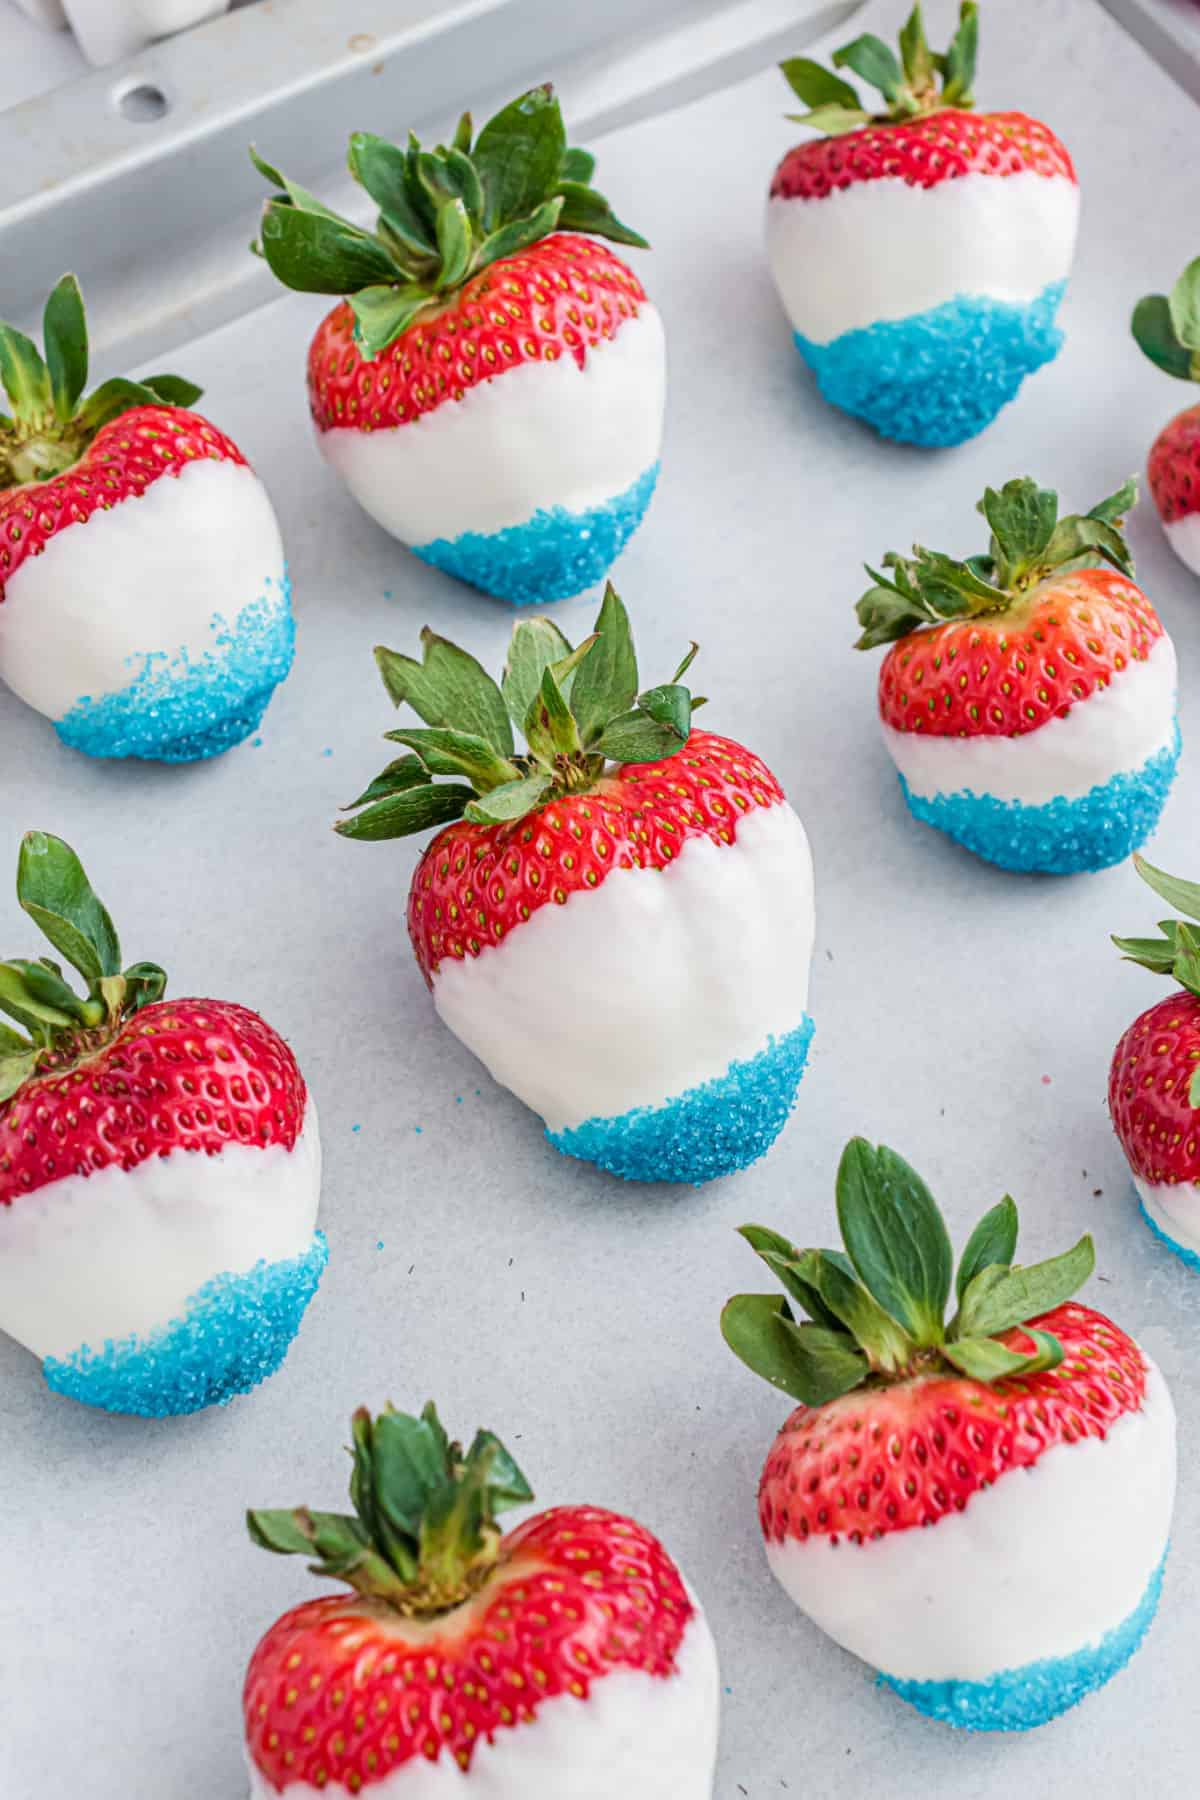 Red white and blue covered strawberries on parchment paper.